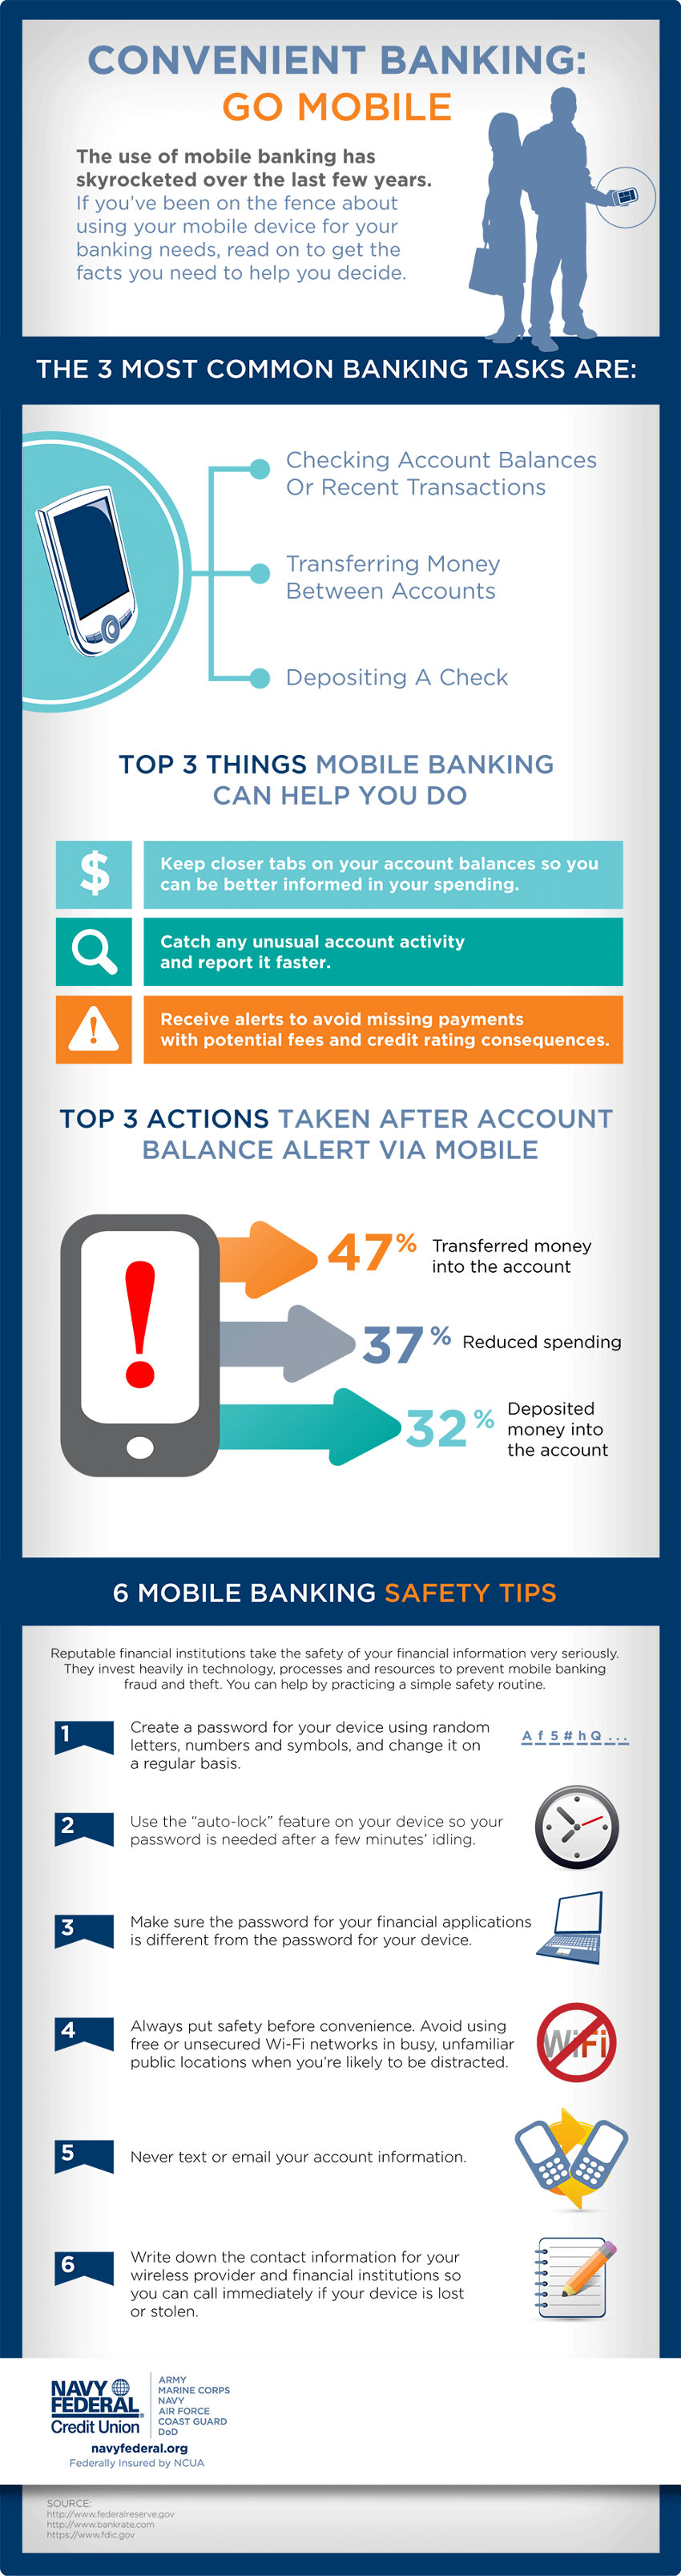 Convenient banking infographic by Navy Federal Credit Union